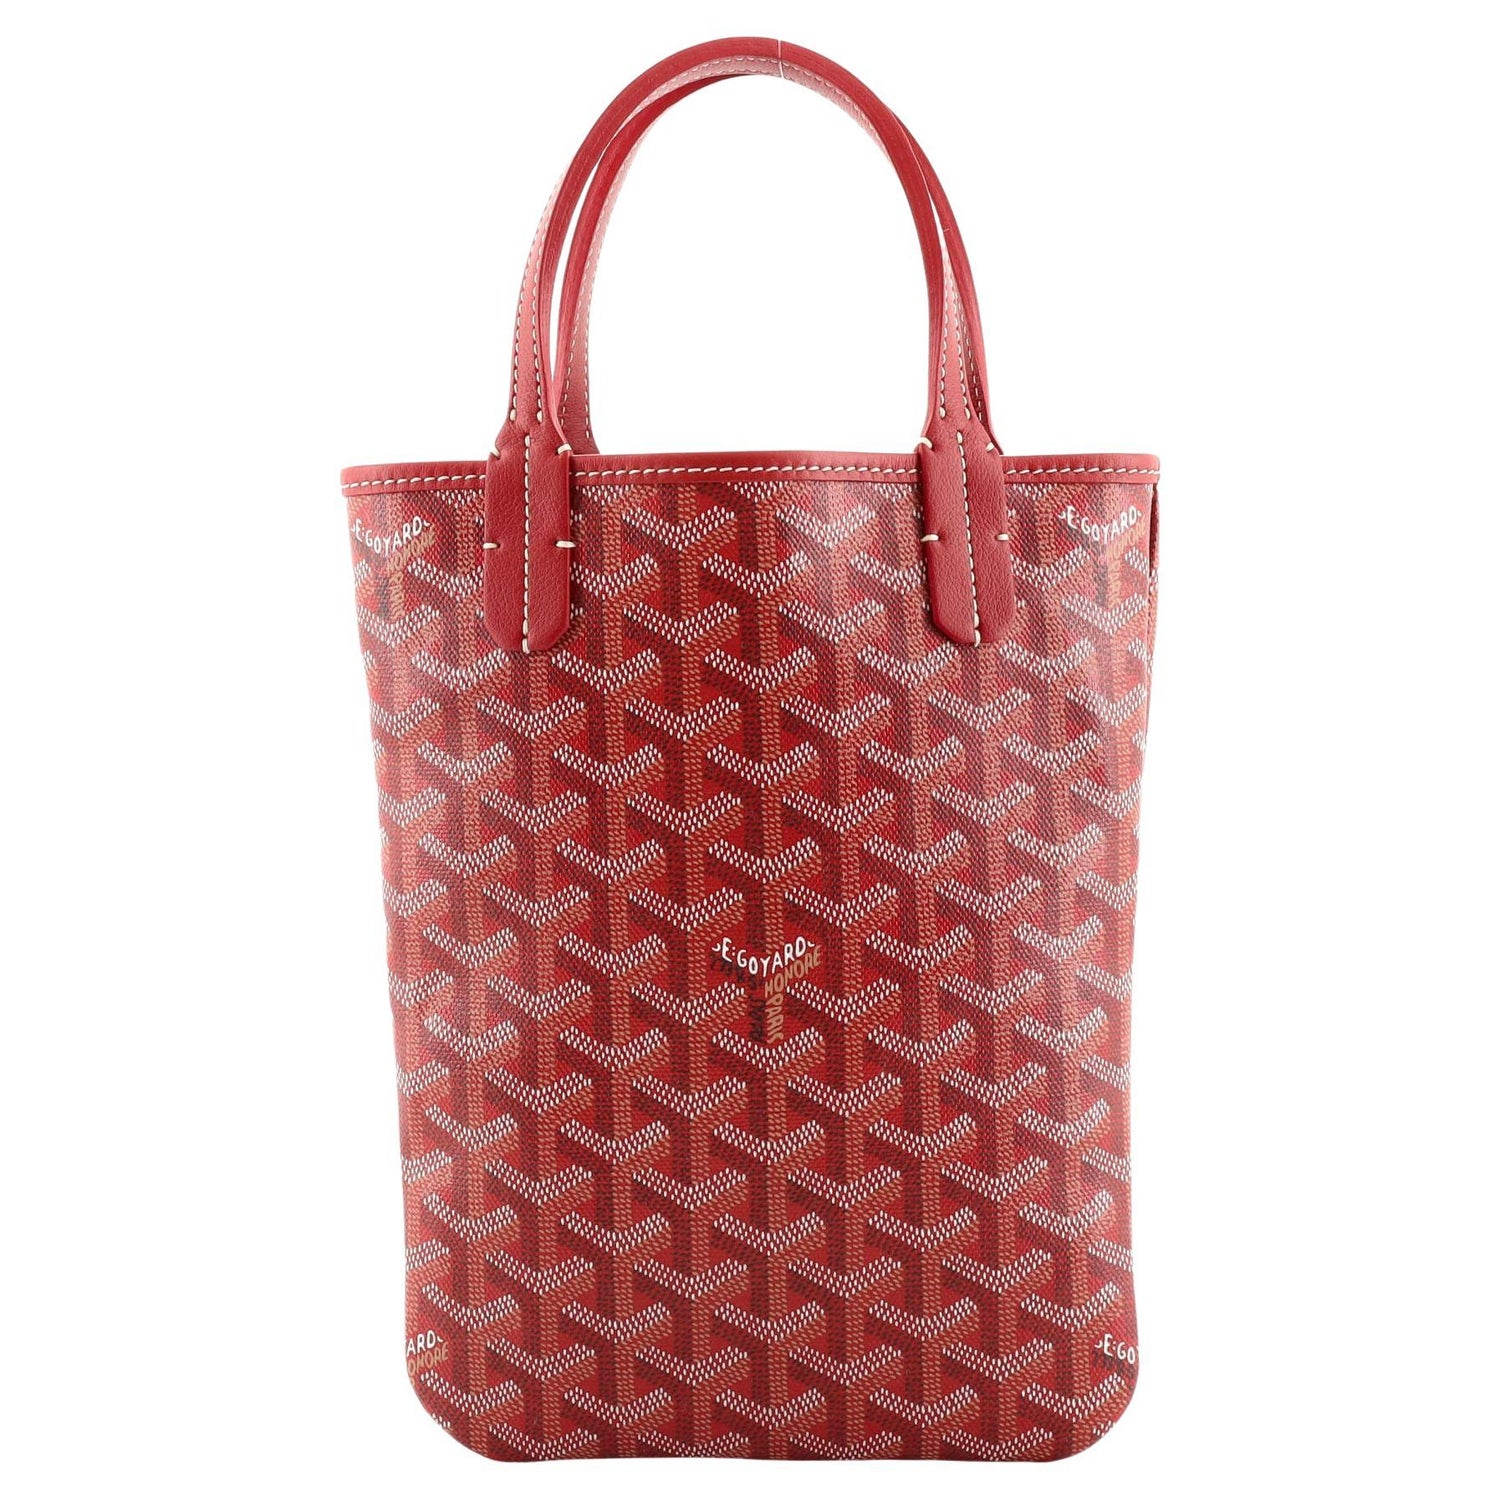 RARE NEW GOYARD GM Artois Traveling Tote - Largest Size in Navy